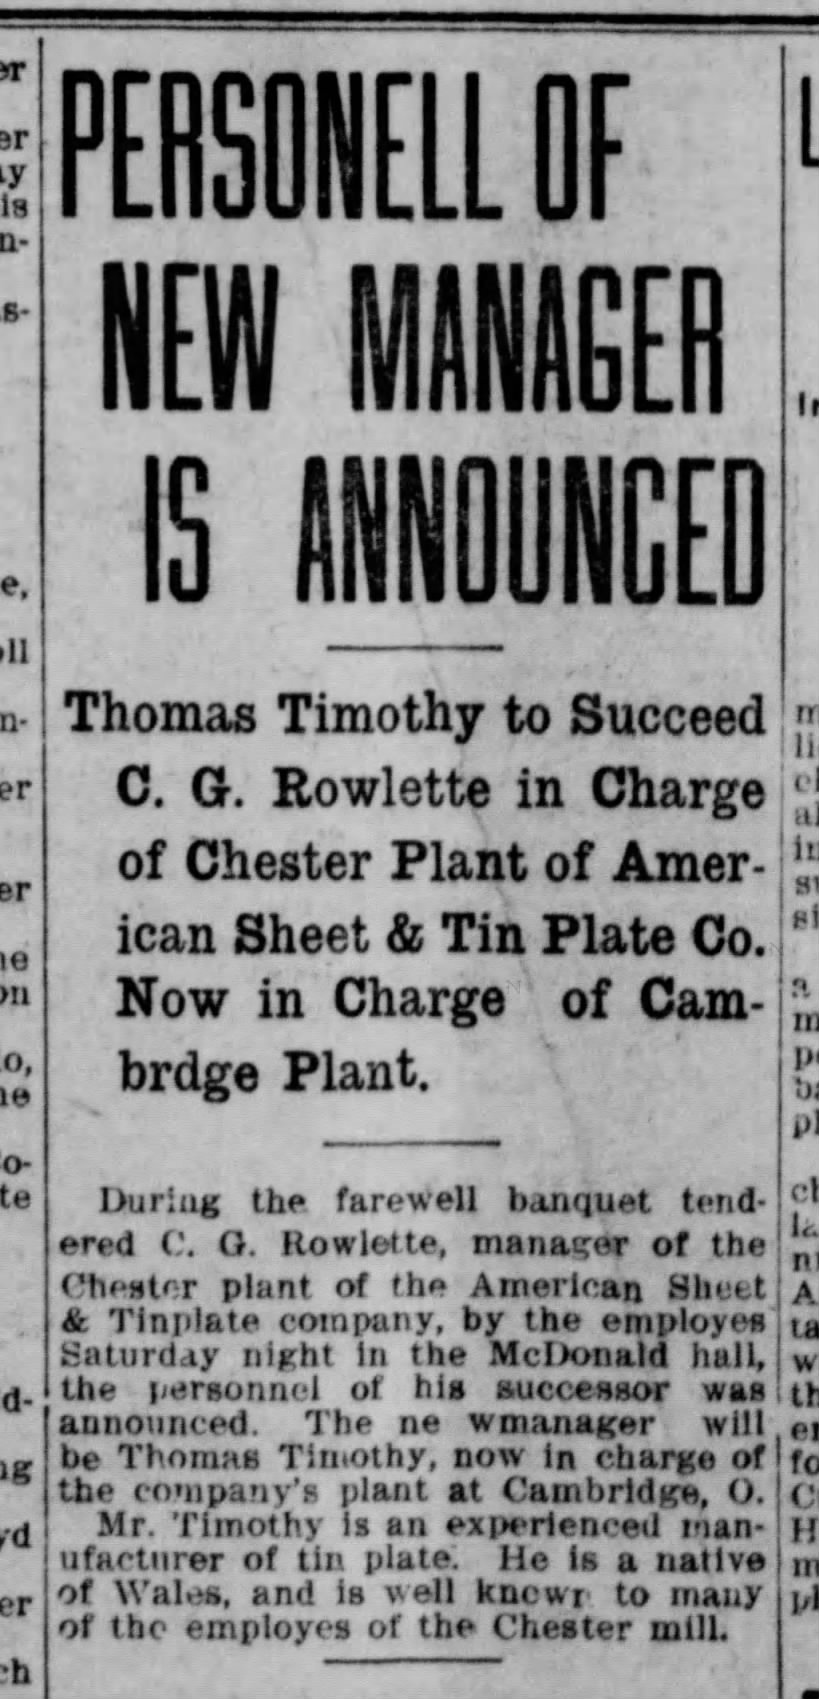 T.R. Timothy is new manager of the Chester plant of American Sheet & Tin Plate Co.